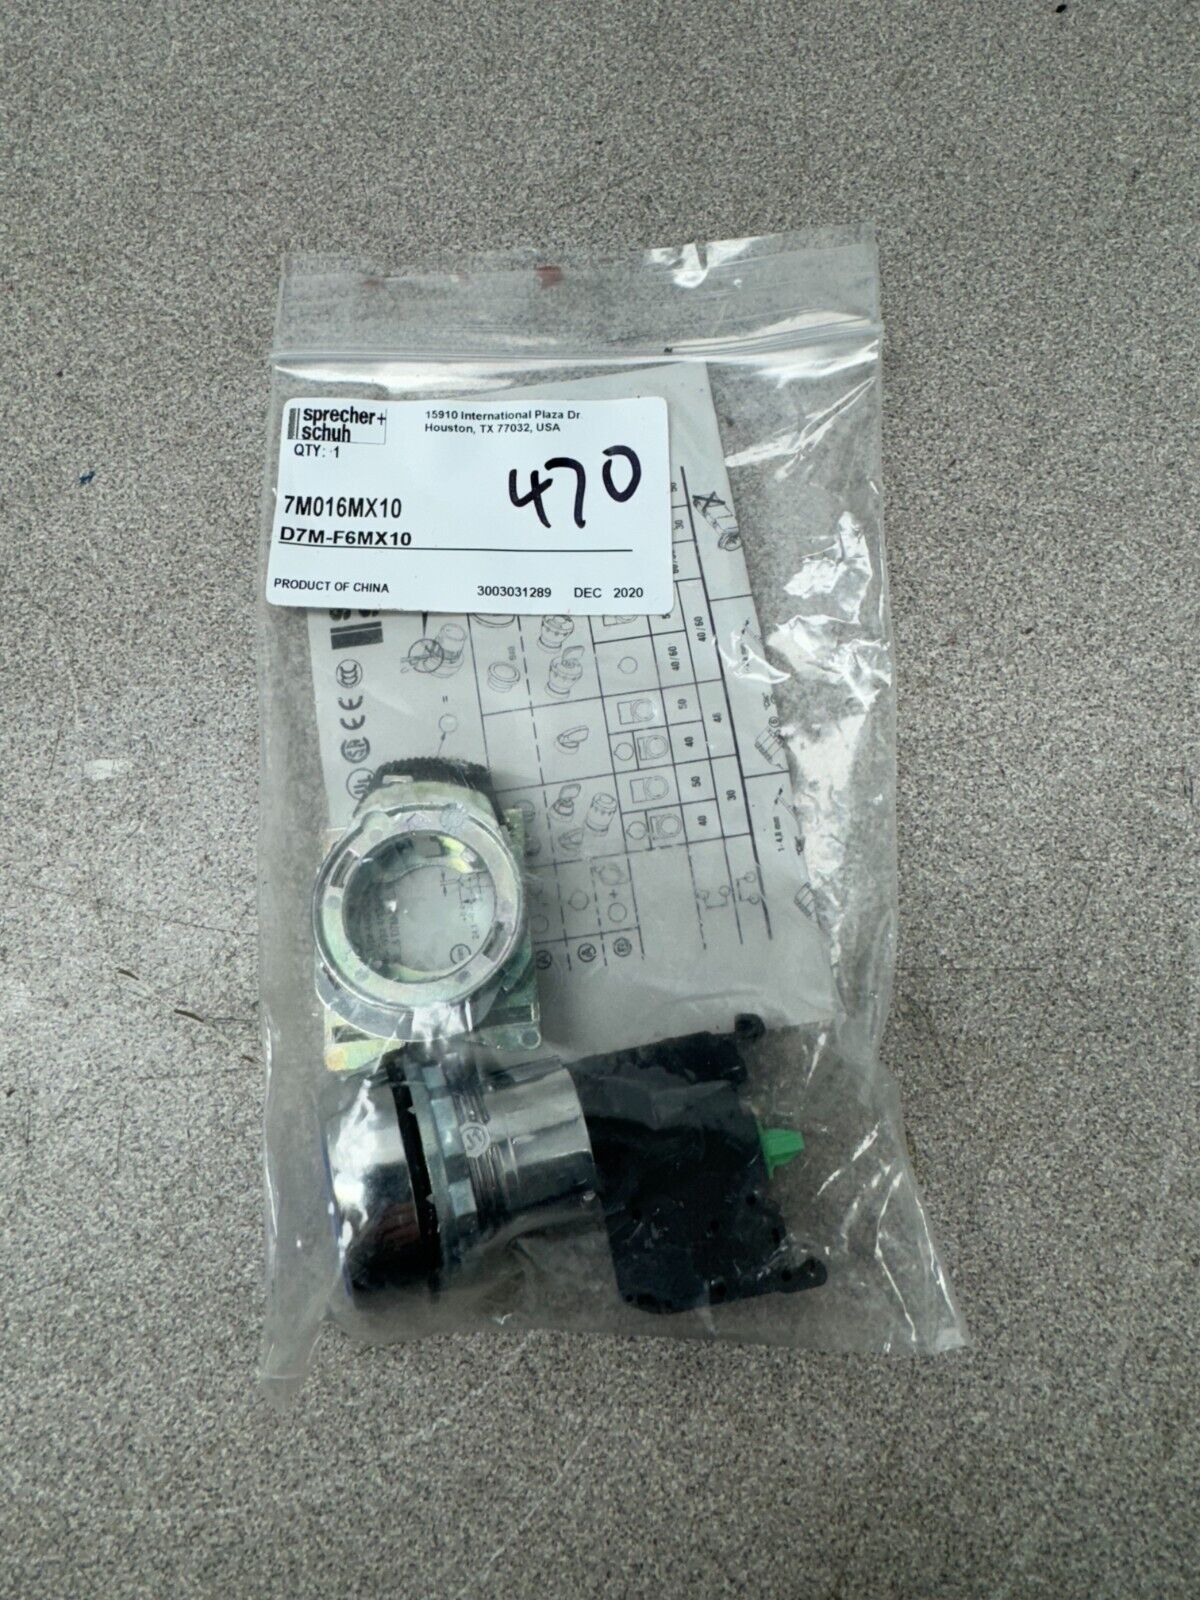 NEW IN PACKAGE SPRECHER SCHUH PUSH BUTTON SWITCH D7M-F6MX10